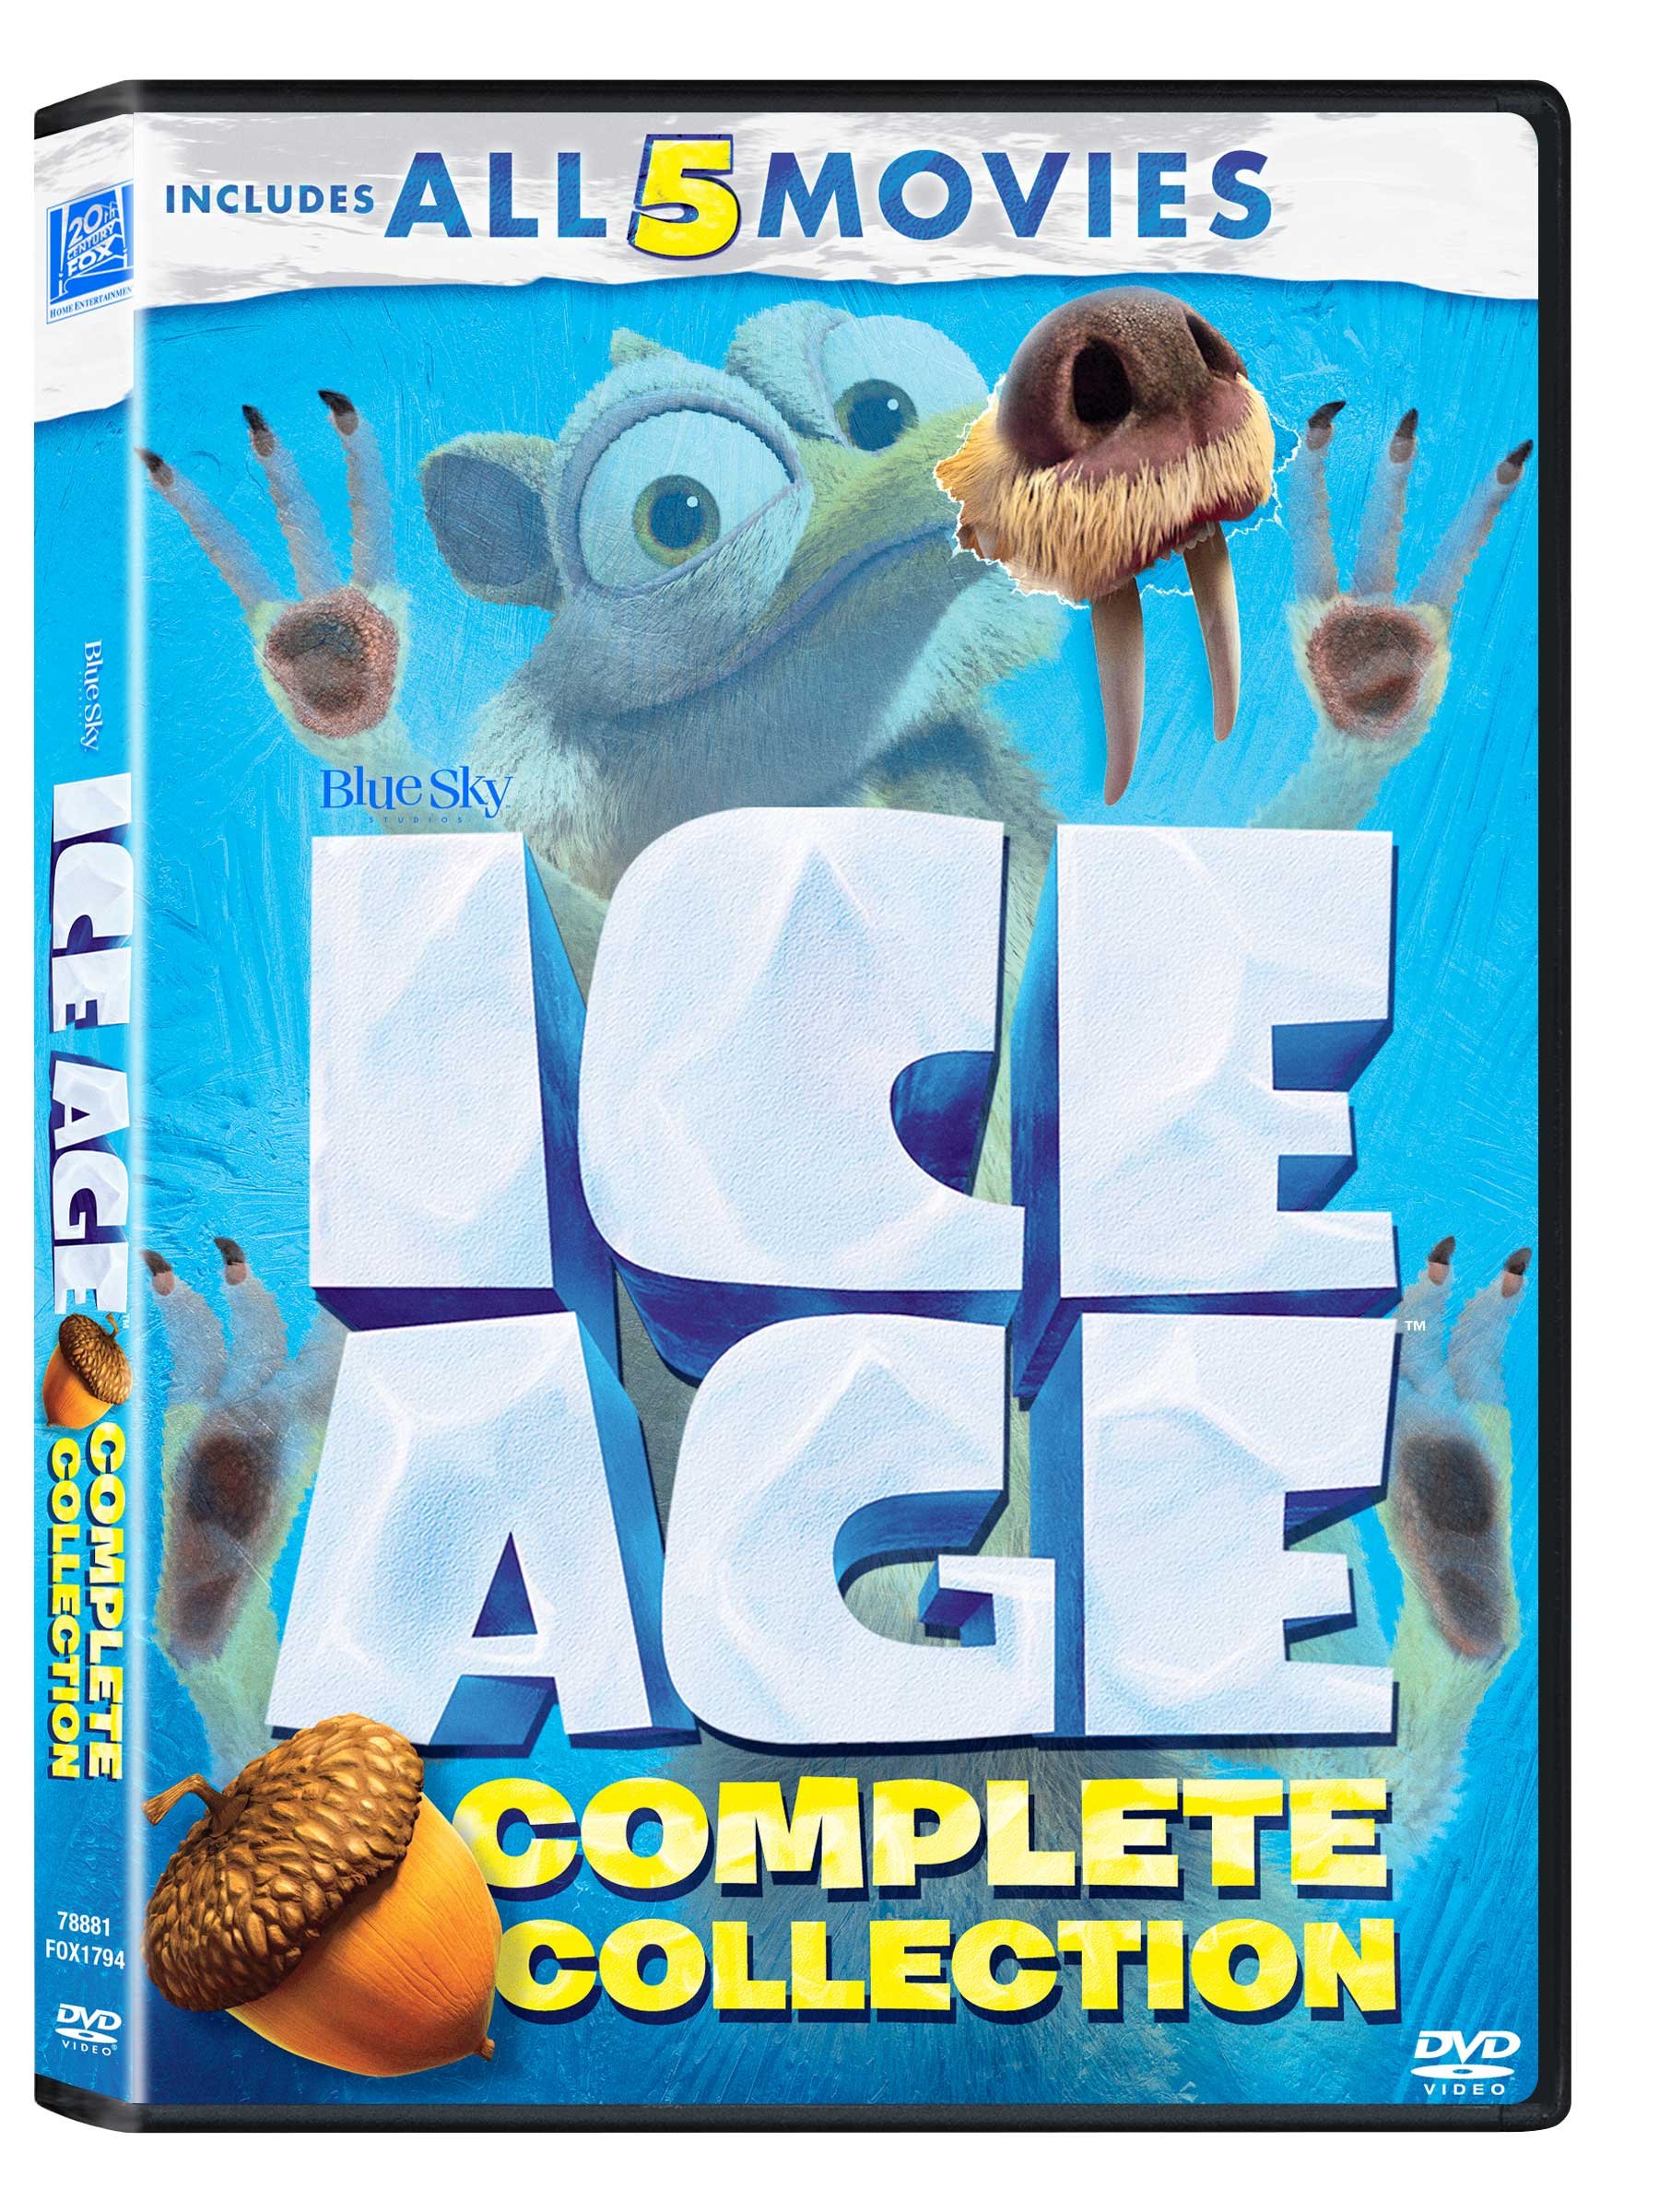 ice-age-the-complete-5-movies-collection-ice-age-ice-age-2-the-meltdown-ice-age-3-dawn-of-dinosaurs-ice-age-4-continental-drift-ice-age-5-collision-course